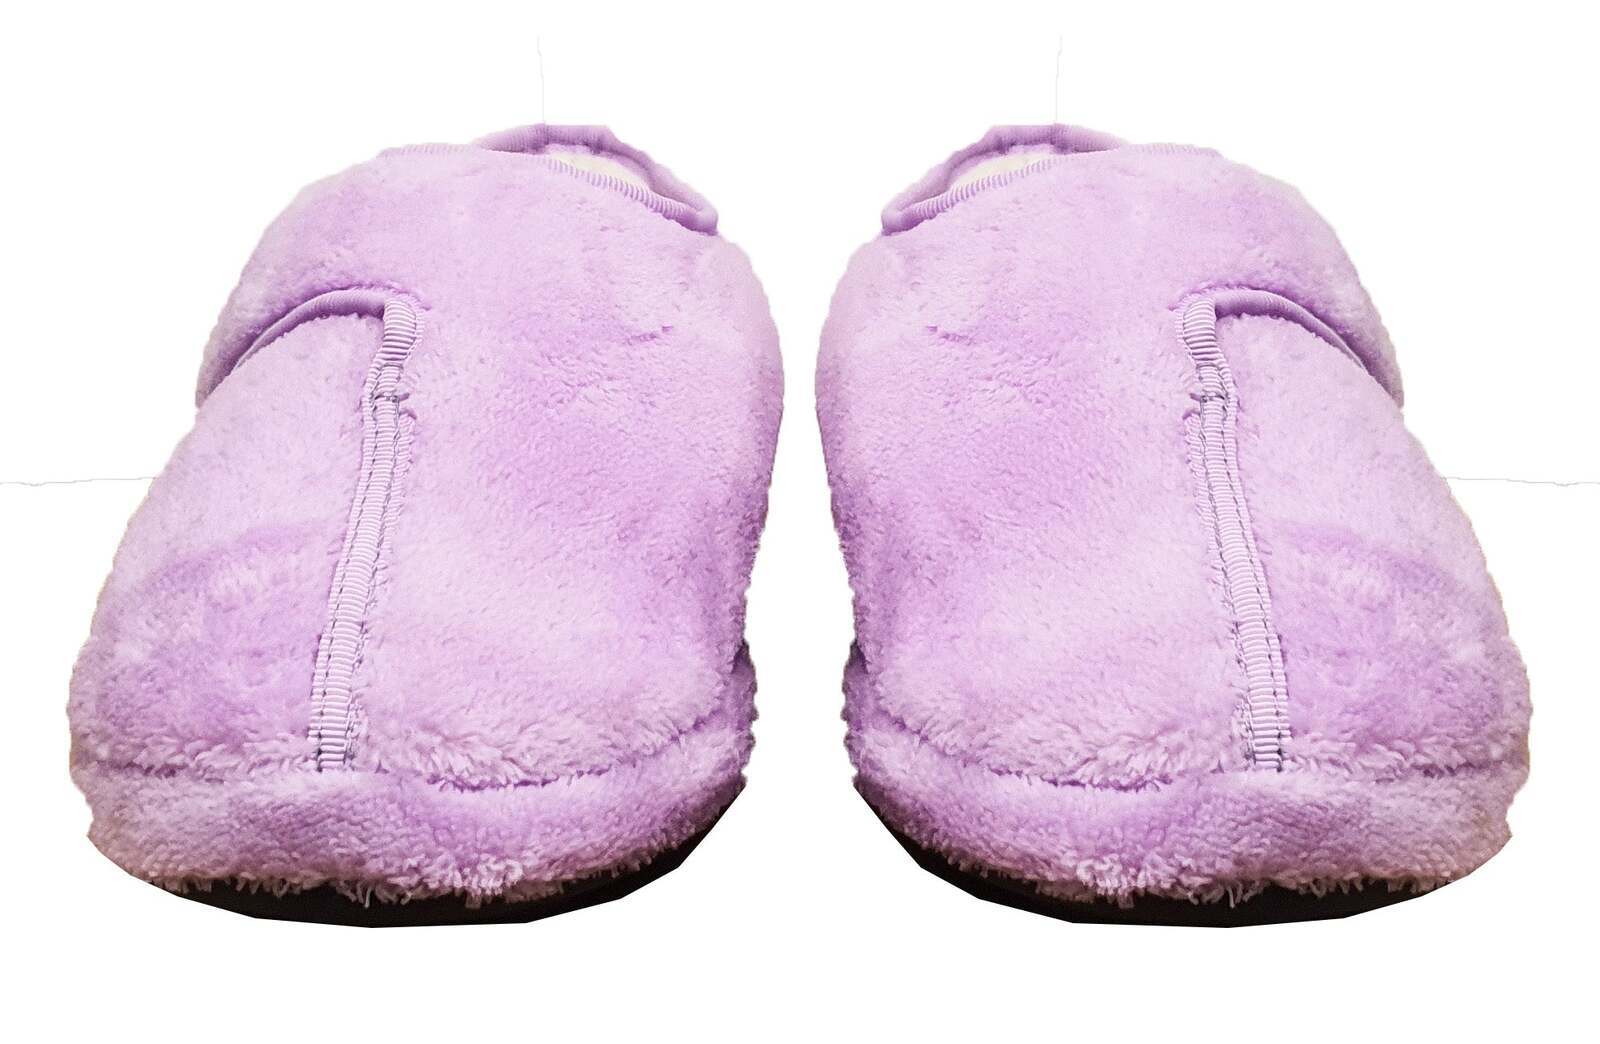 ARCHLINE Orthotic Plus Slippers Closed Scuffs Pain Relief Moccasins - Lilac - EU 38